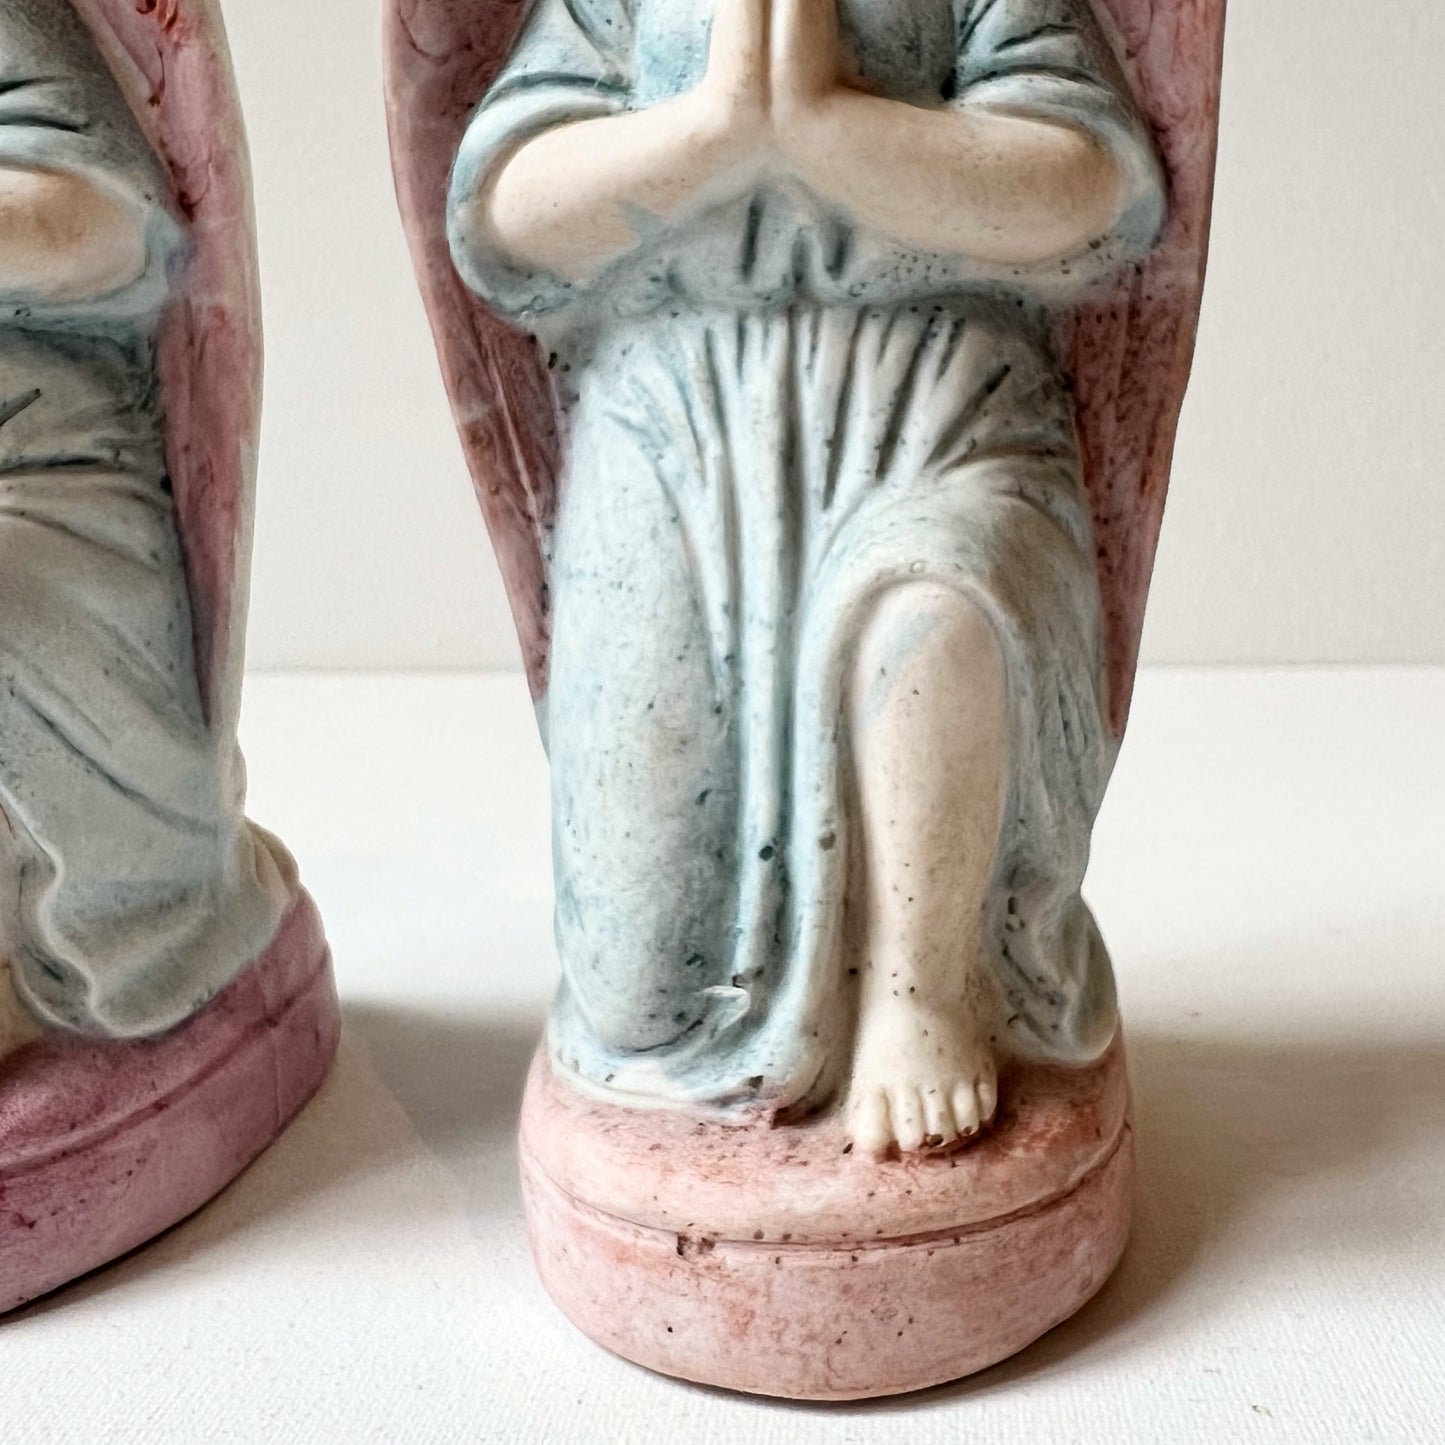 【Antique】France - 1900s Pottery Angel Statue (set of 2)